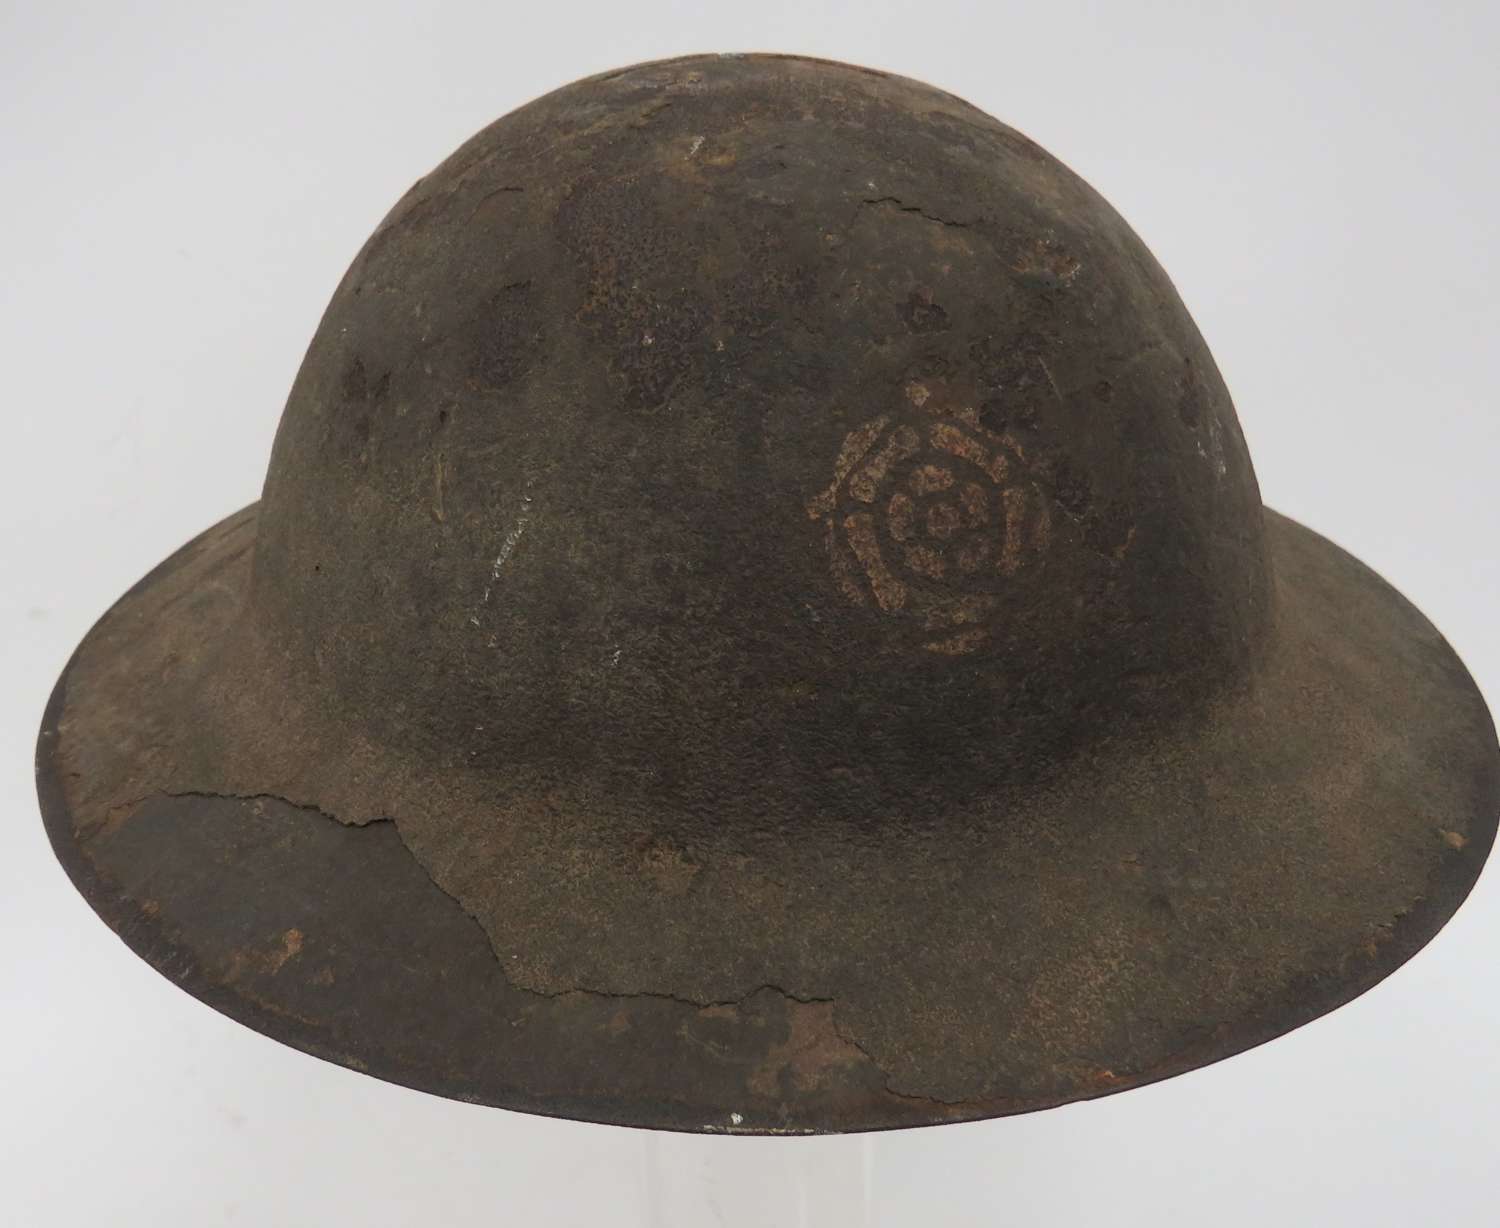 Rare WW1 49th (W.Riding) Divisional Formation Badged Helmet